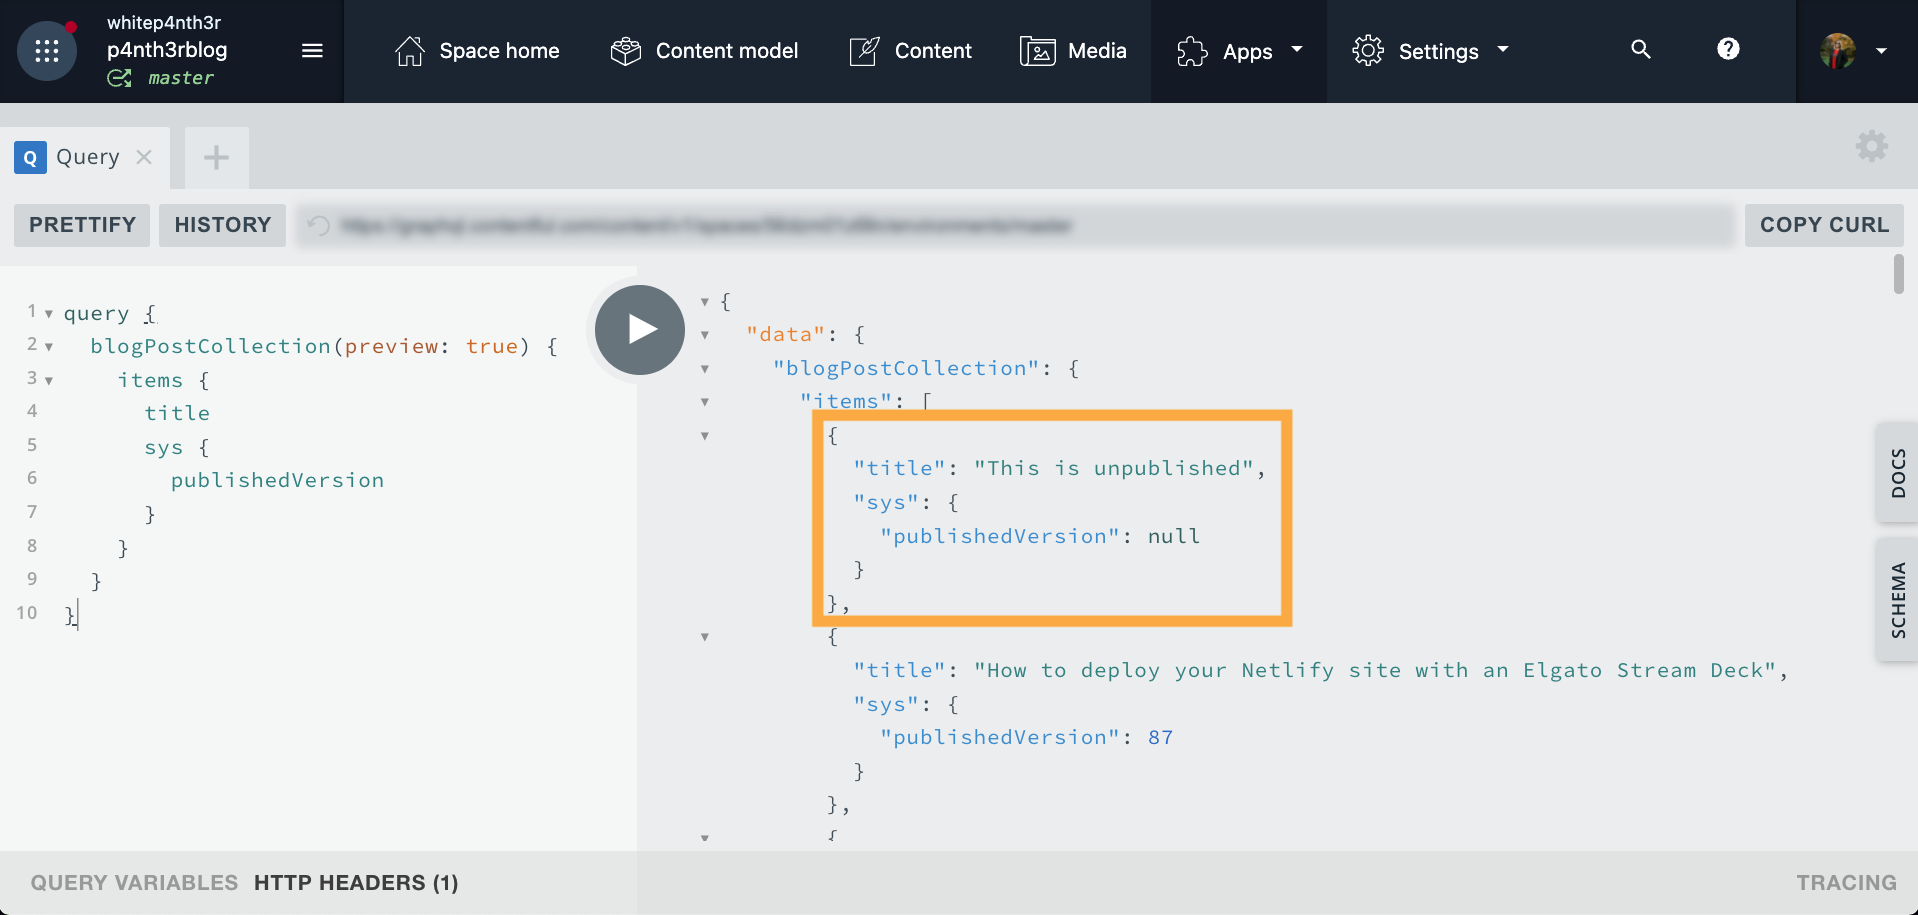 A screenshot from the Contentful GraphQL Playground app, showing a GraphQL response with an item that returns sys dot published version as null to confirm it is unpublished and we are receiving draft content using preview: true.